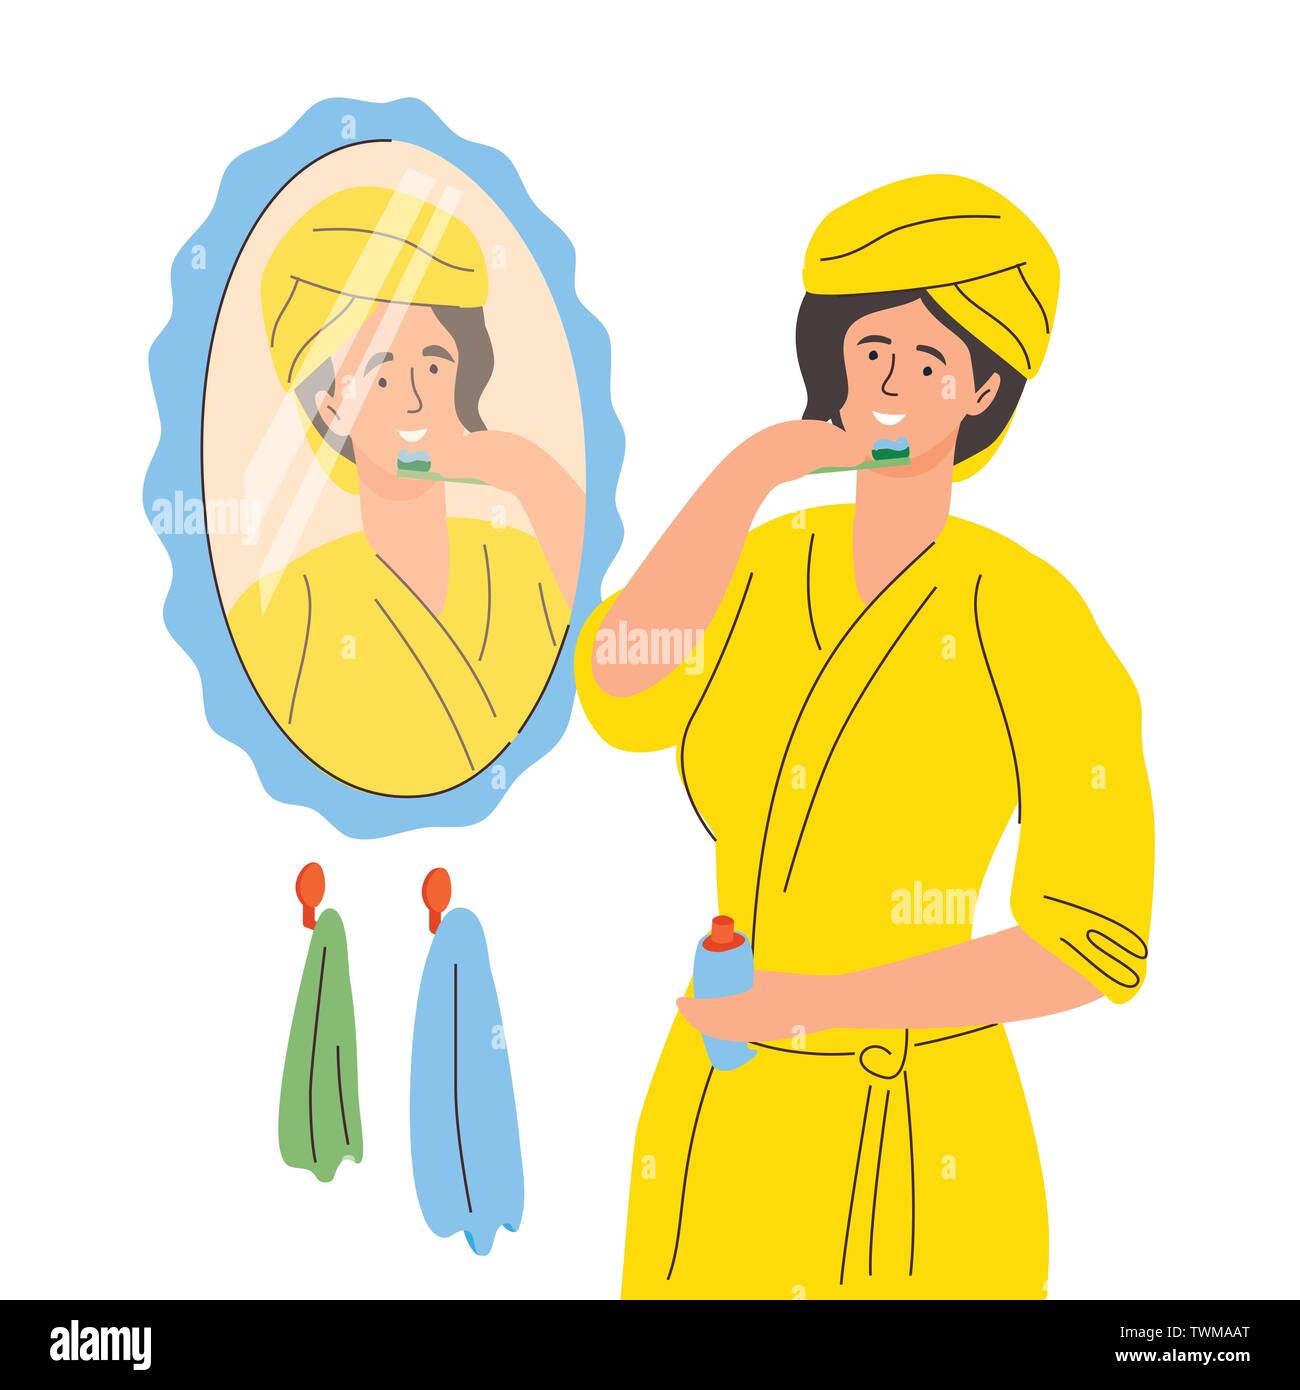 A woman brushing her teeth - colorful flat design style illustration Stock Vector